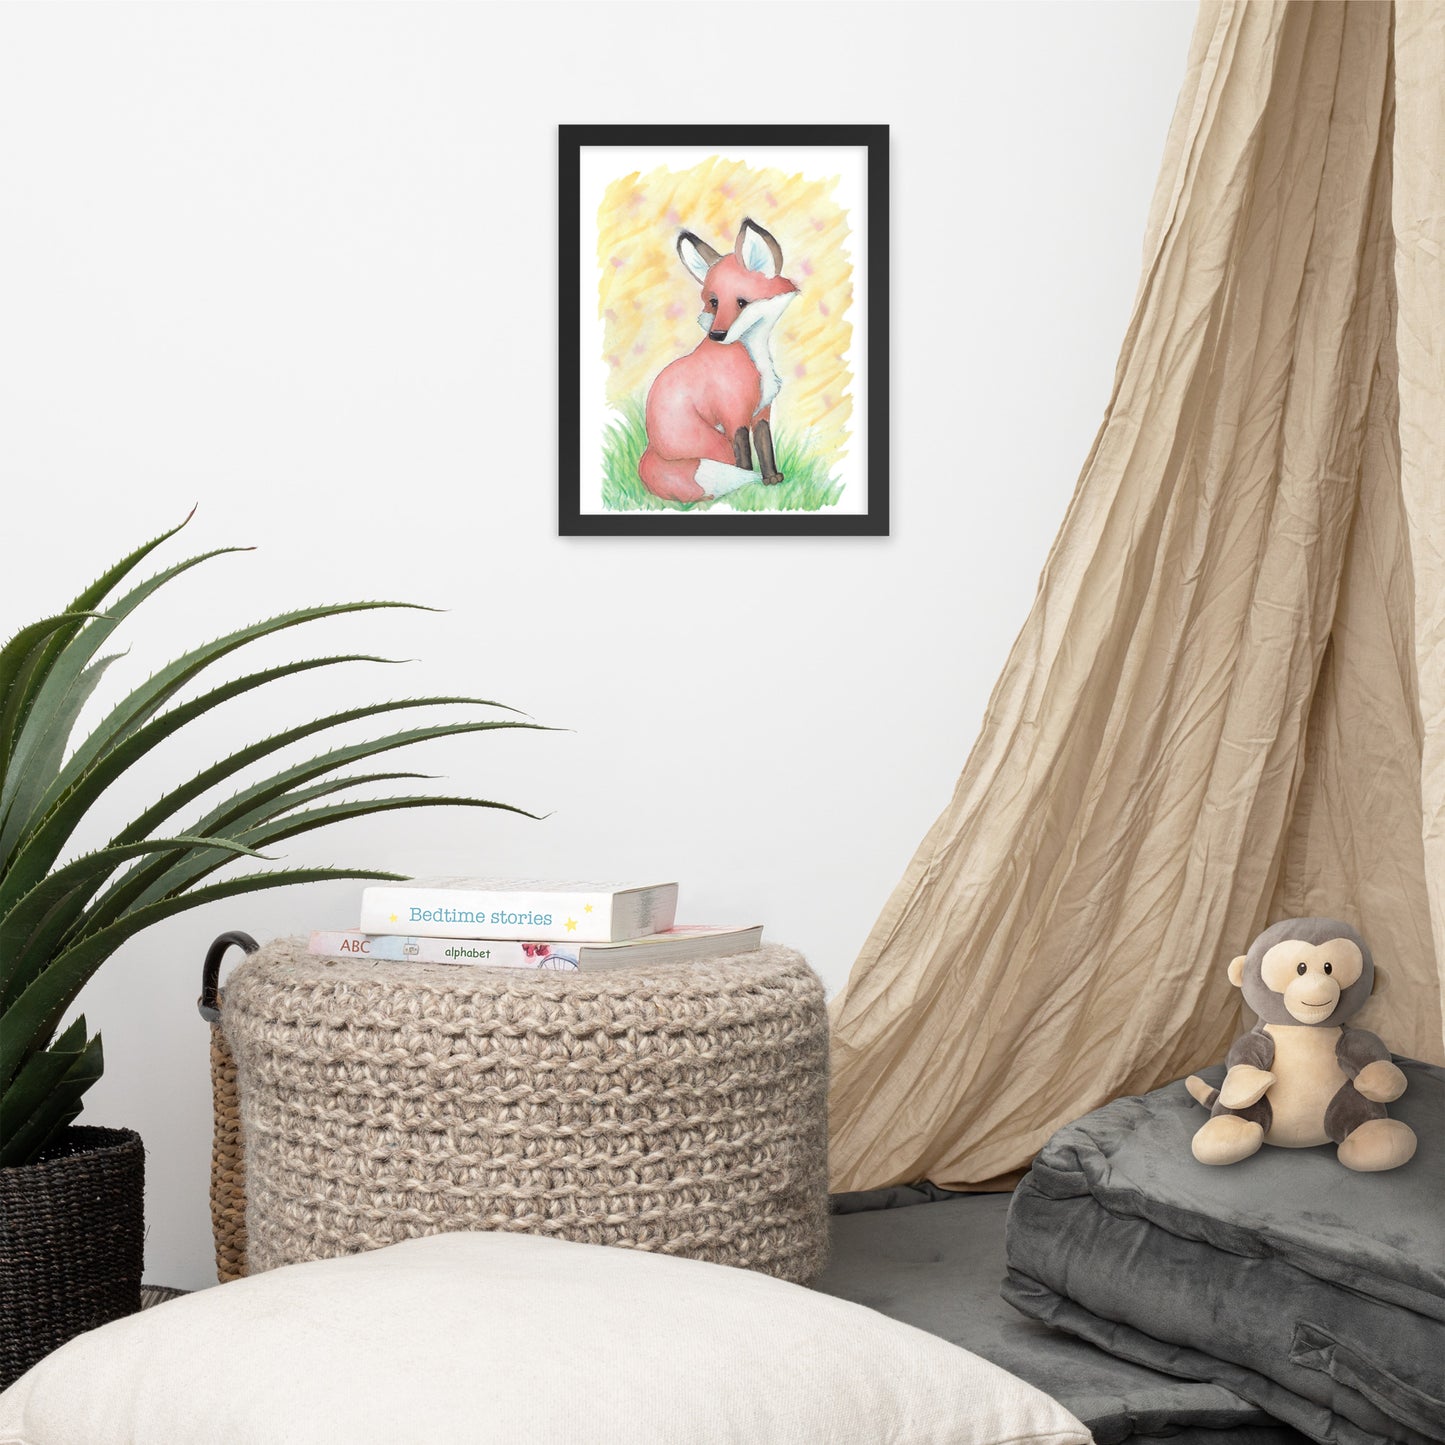 11 x 14 inch Sunset Fox art print. Shown in a black frame on a wall above a tan curtain and an ottoman with books for decorative suggestion. Listing is for unframed art print.